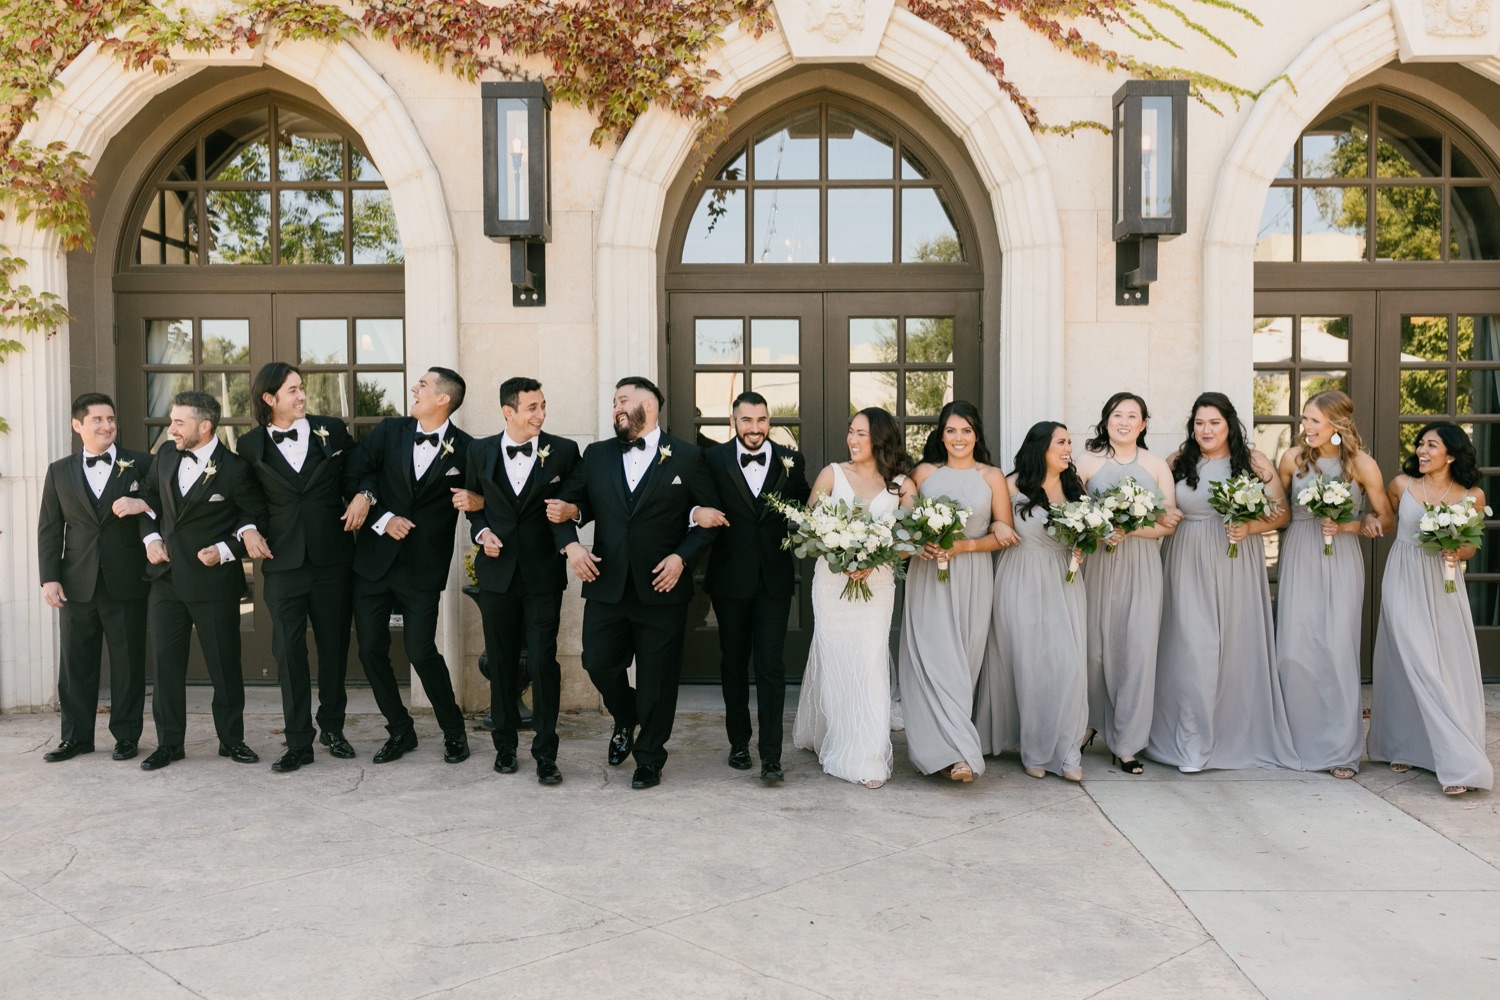 wedding party portrait candid at tooth and nail winery in paso robles, ca by tayler enerle Photography